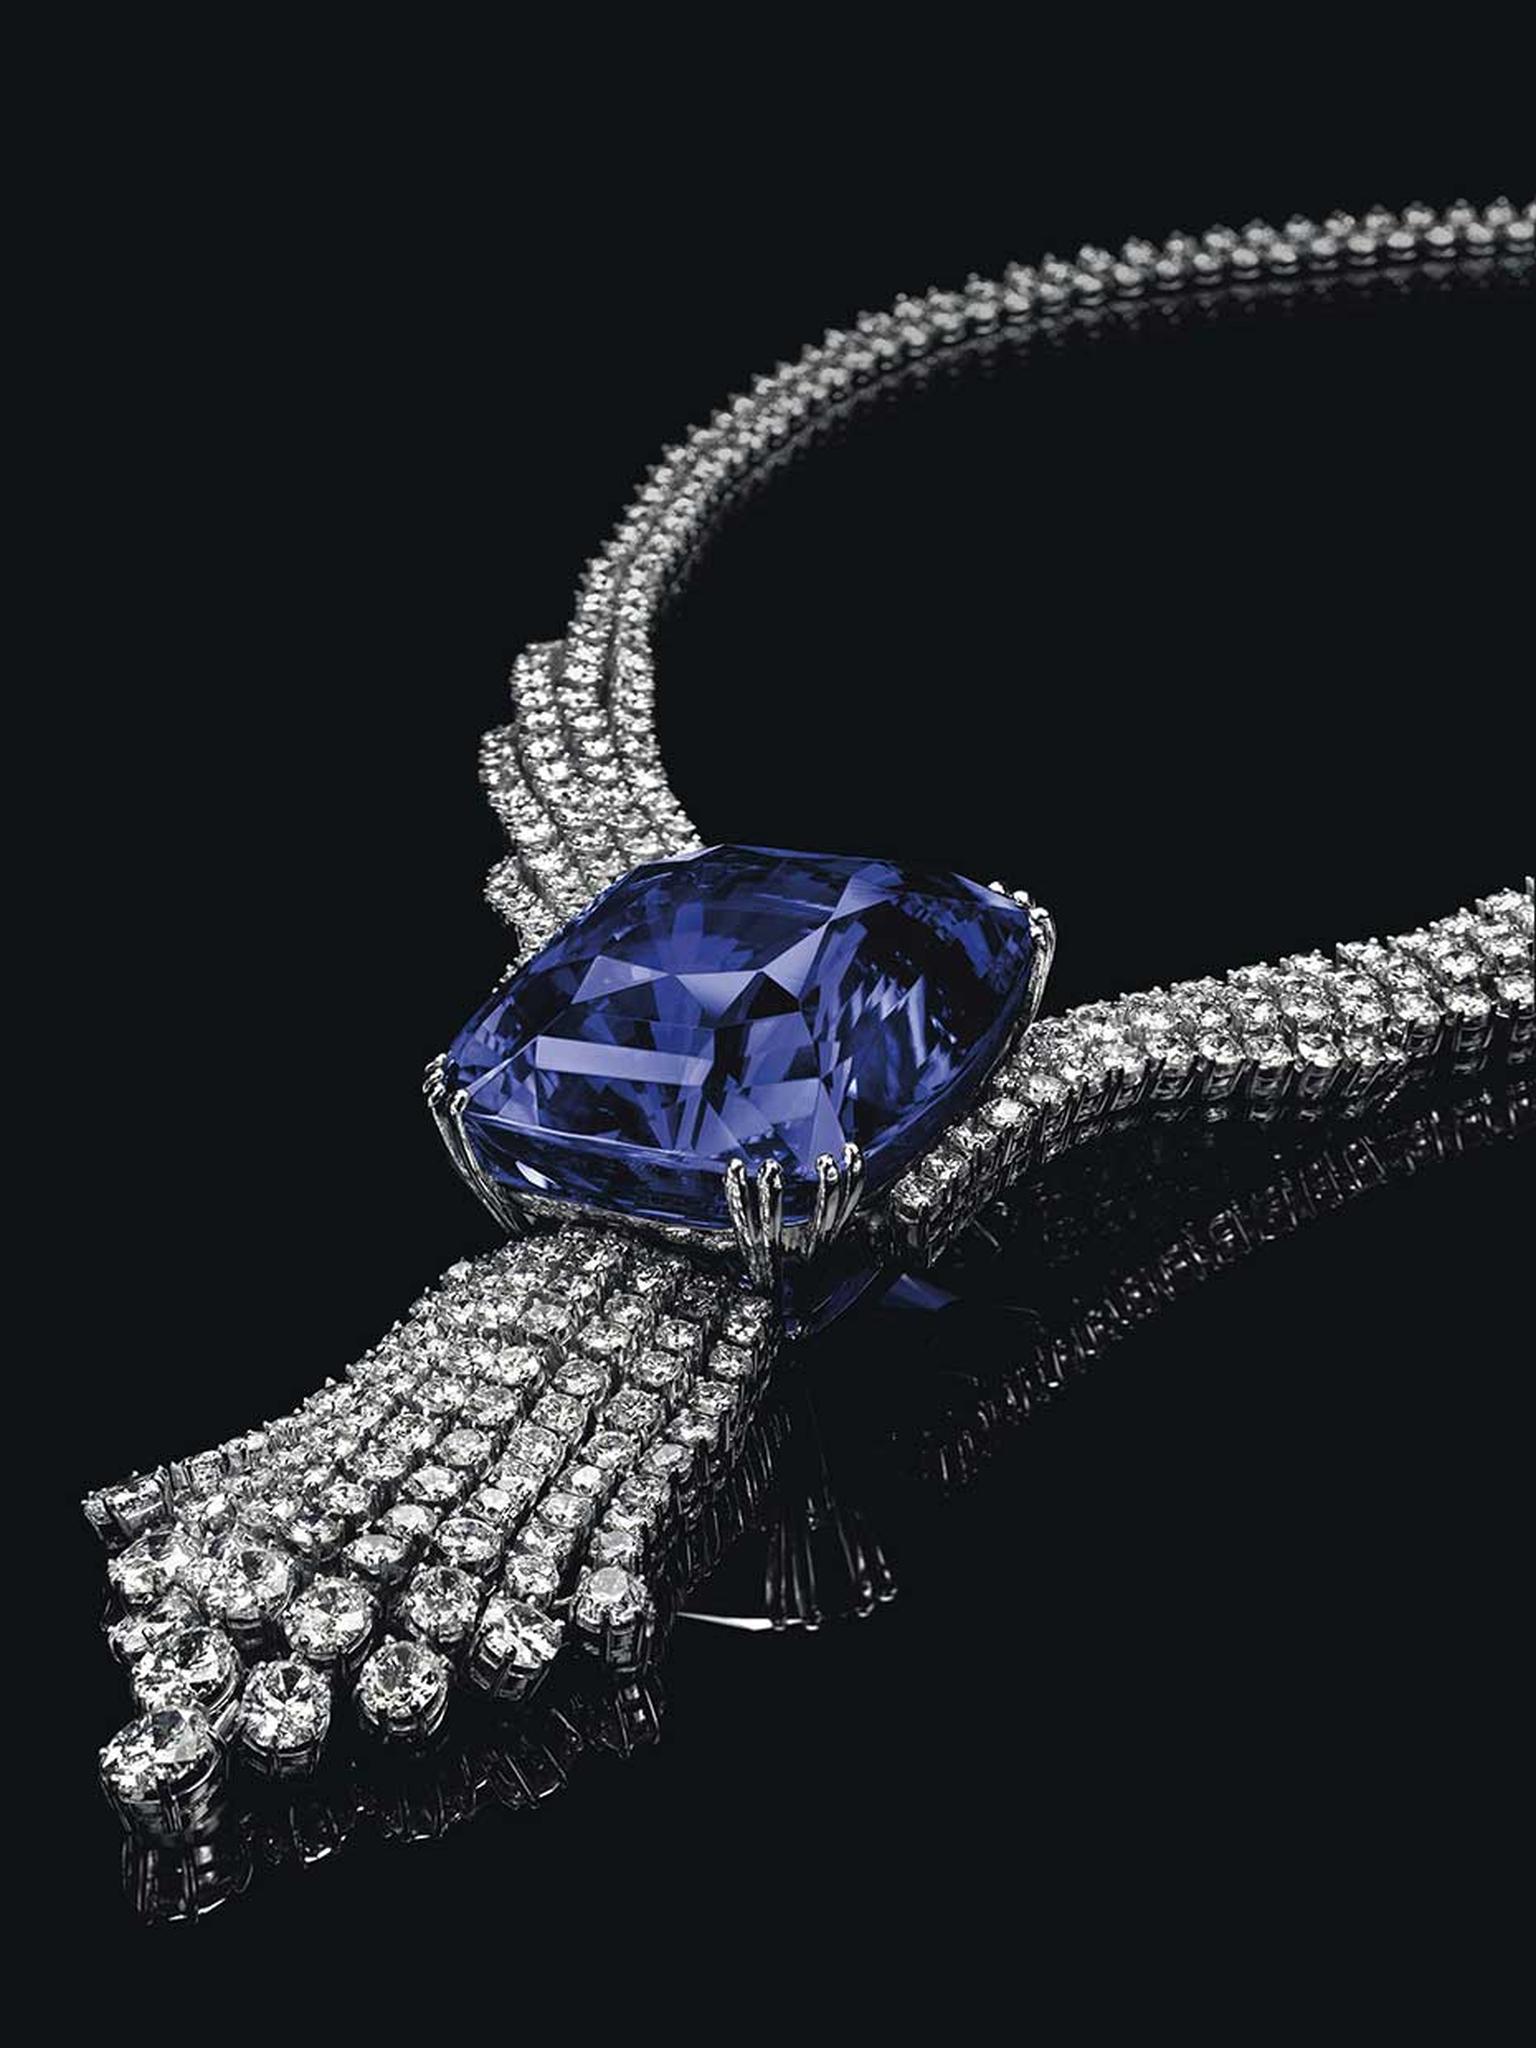 At Christie's Magnificent Jewels Sale in Geneva on 11 November 2014, the 392.52ct Blue Belle of Asia sapphire necklace sold for $17.2 million, setting a new world record for any sapphire sold at auction.